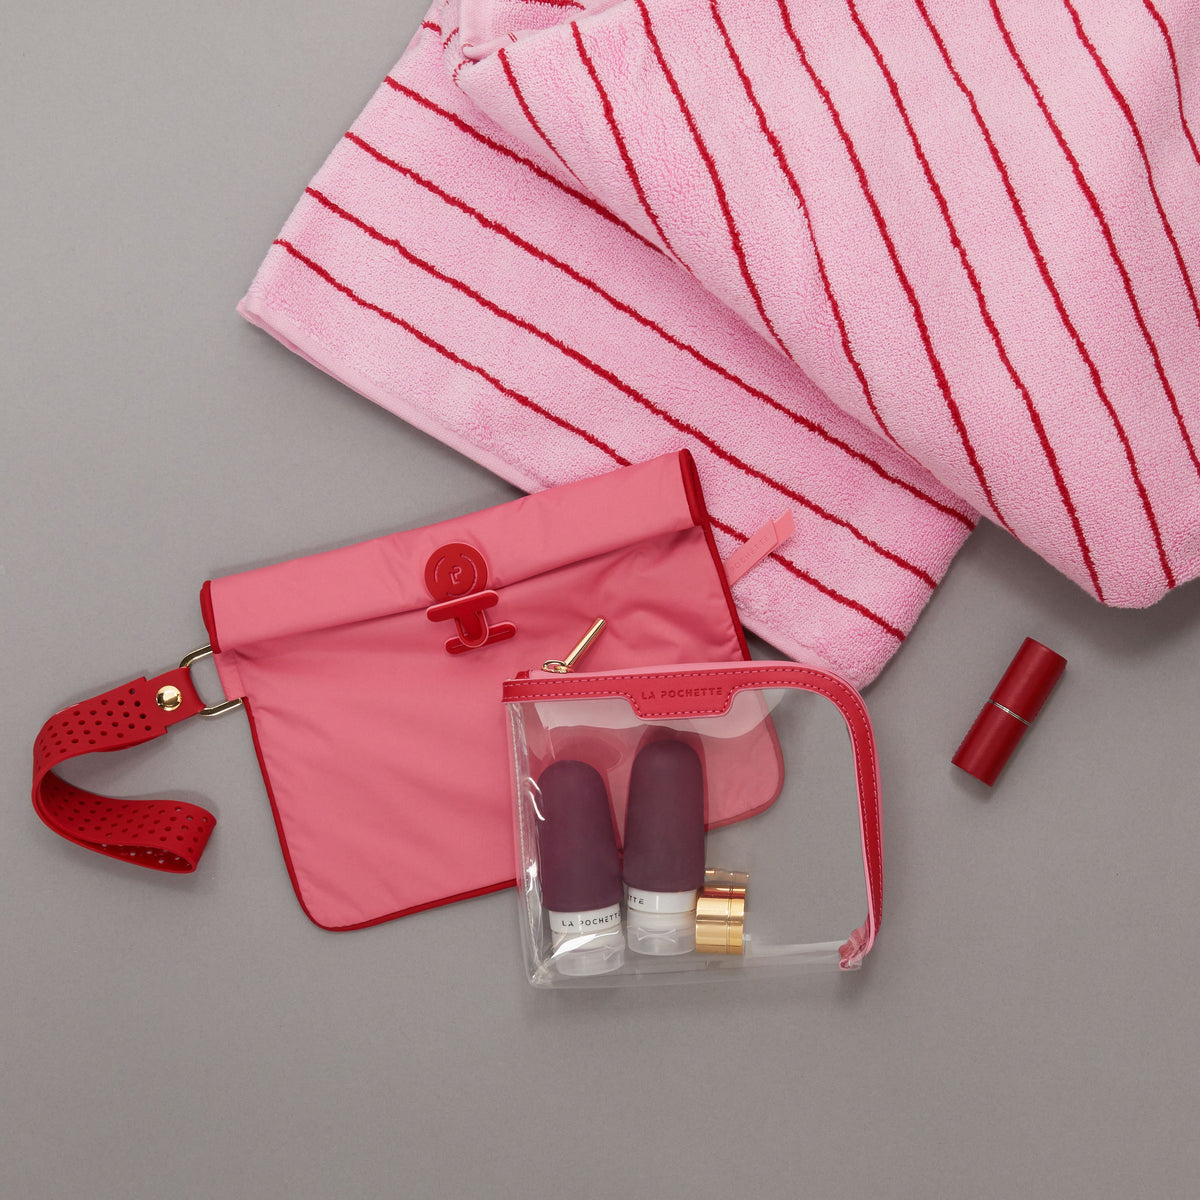 Small wet bag in Peony in Chilli colourway lying flat with a small Anywhere Everywhere Pouch containing La Pochette silicone travel bottles, a lipstick, and beach towel